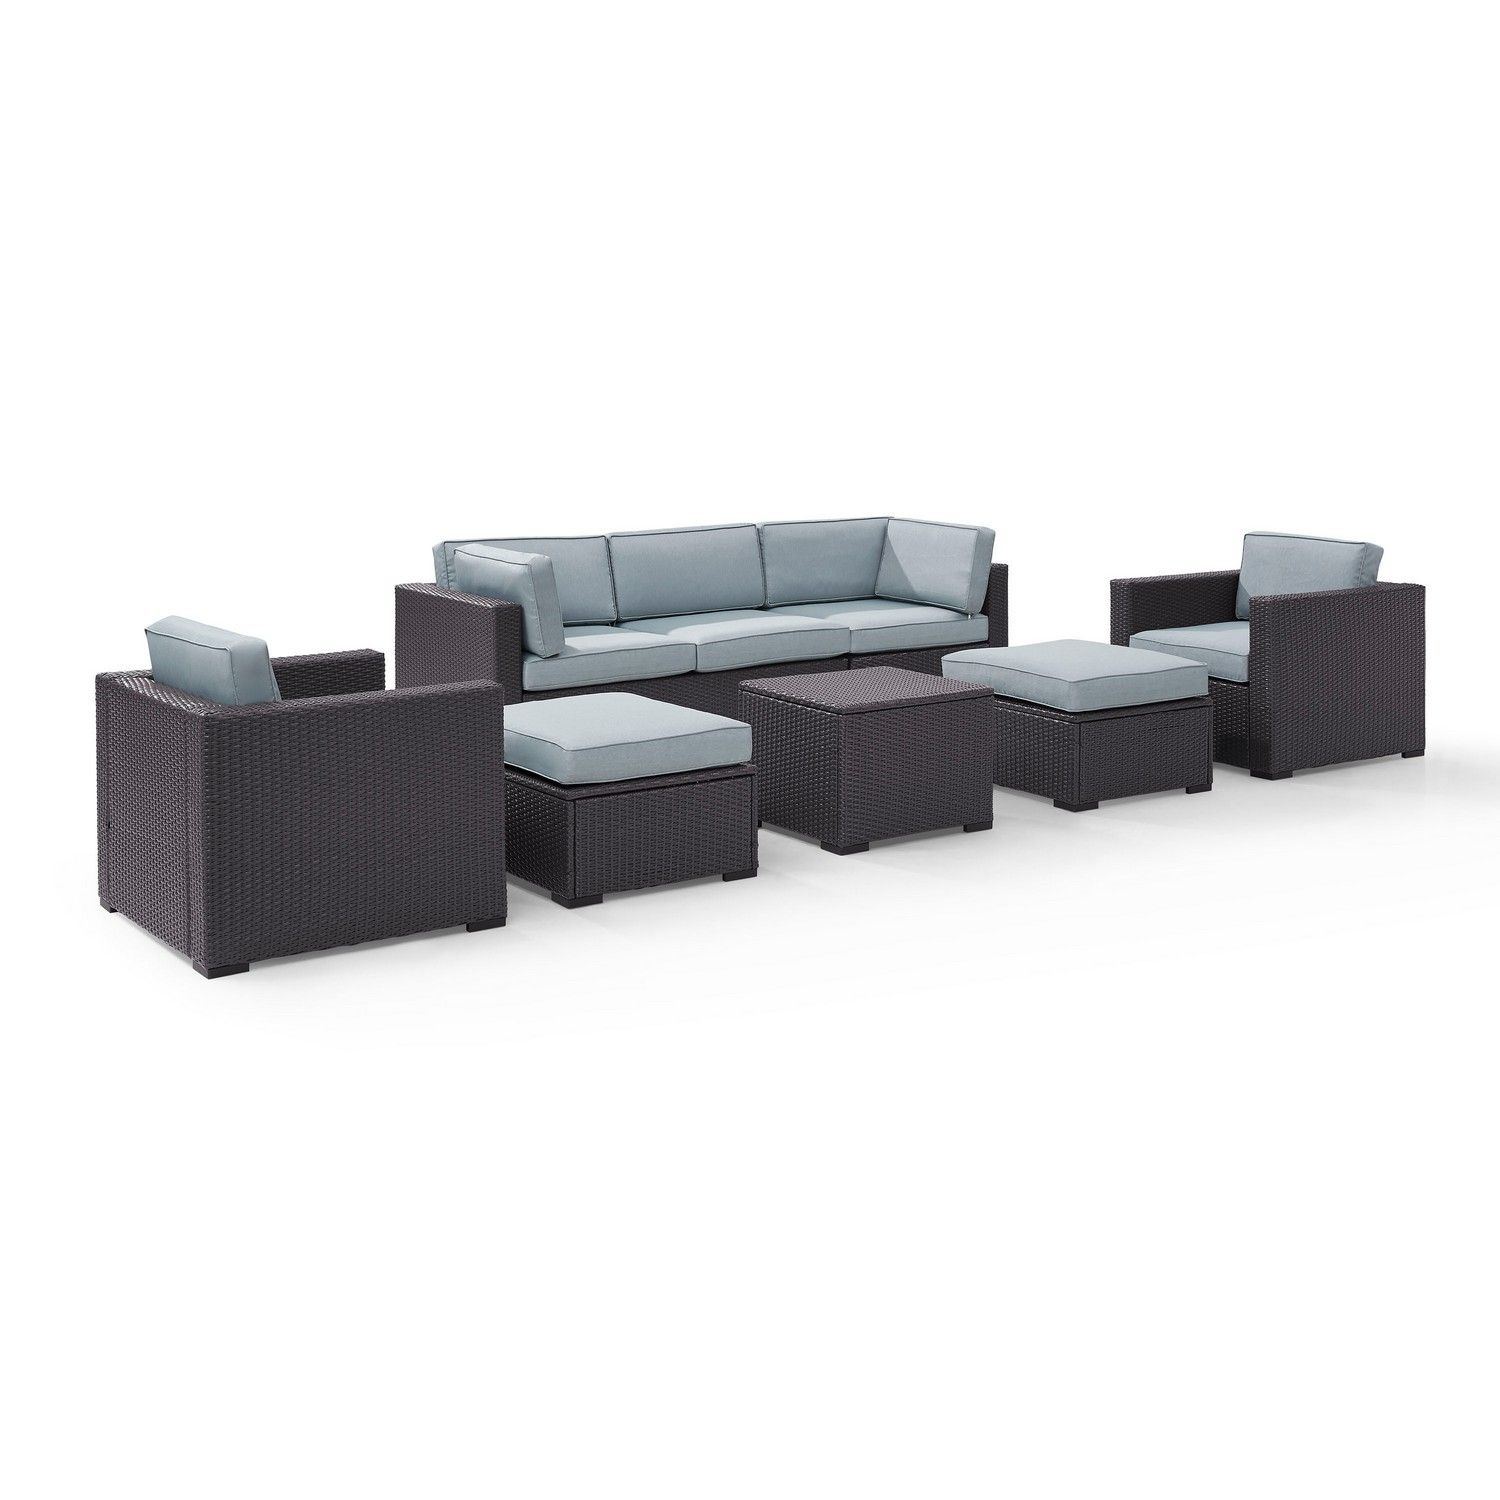 Crosley Biscayne 7-PC Outdoor Wicker Sectional Set - Loveseat, 2 Arm Chairs, Corner Chair, Coffee Table, 2 Ottomans - Mist/Brown